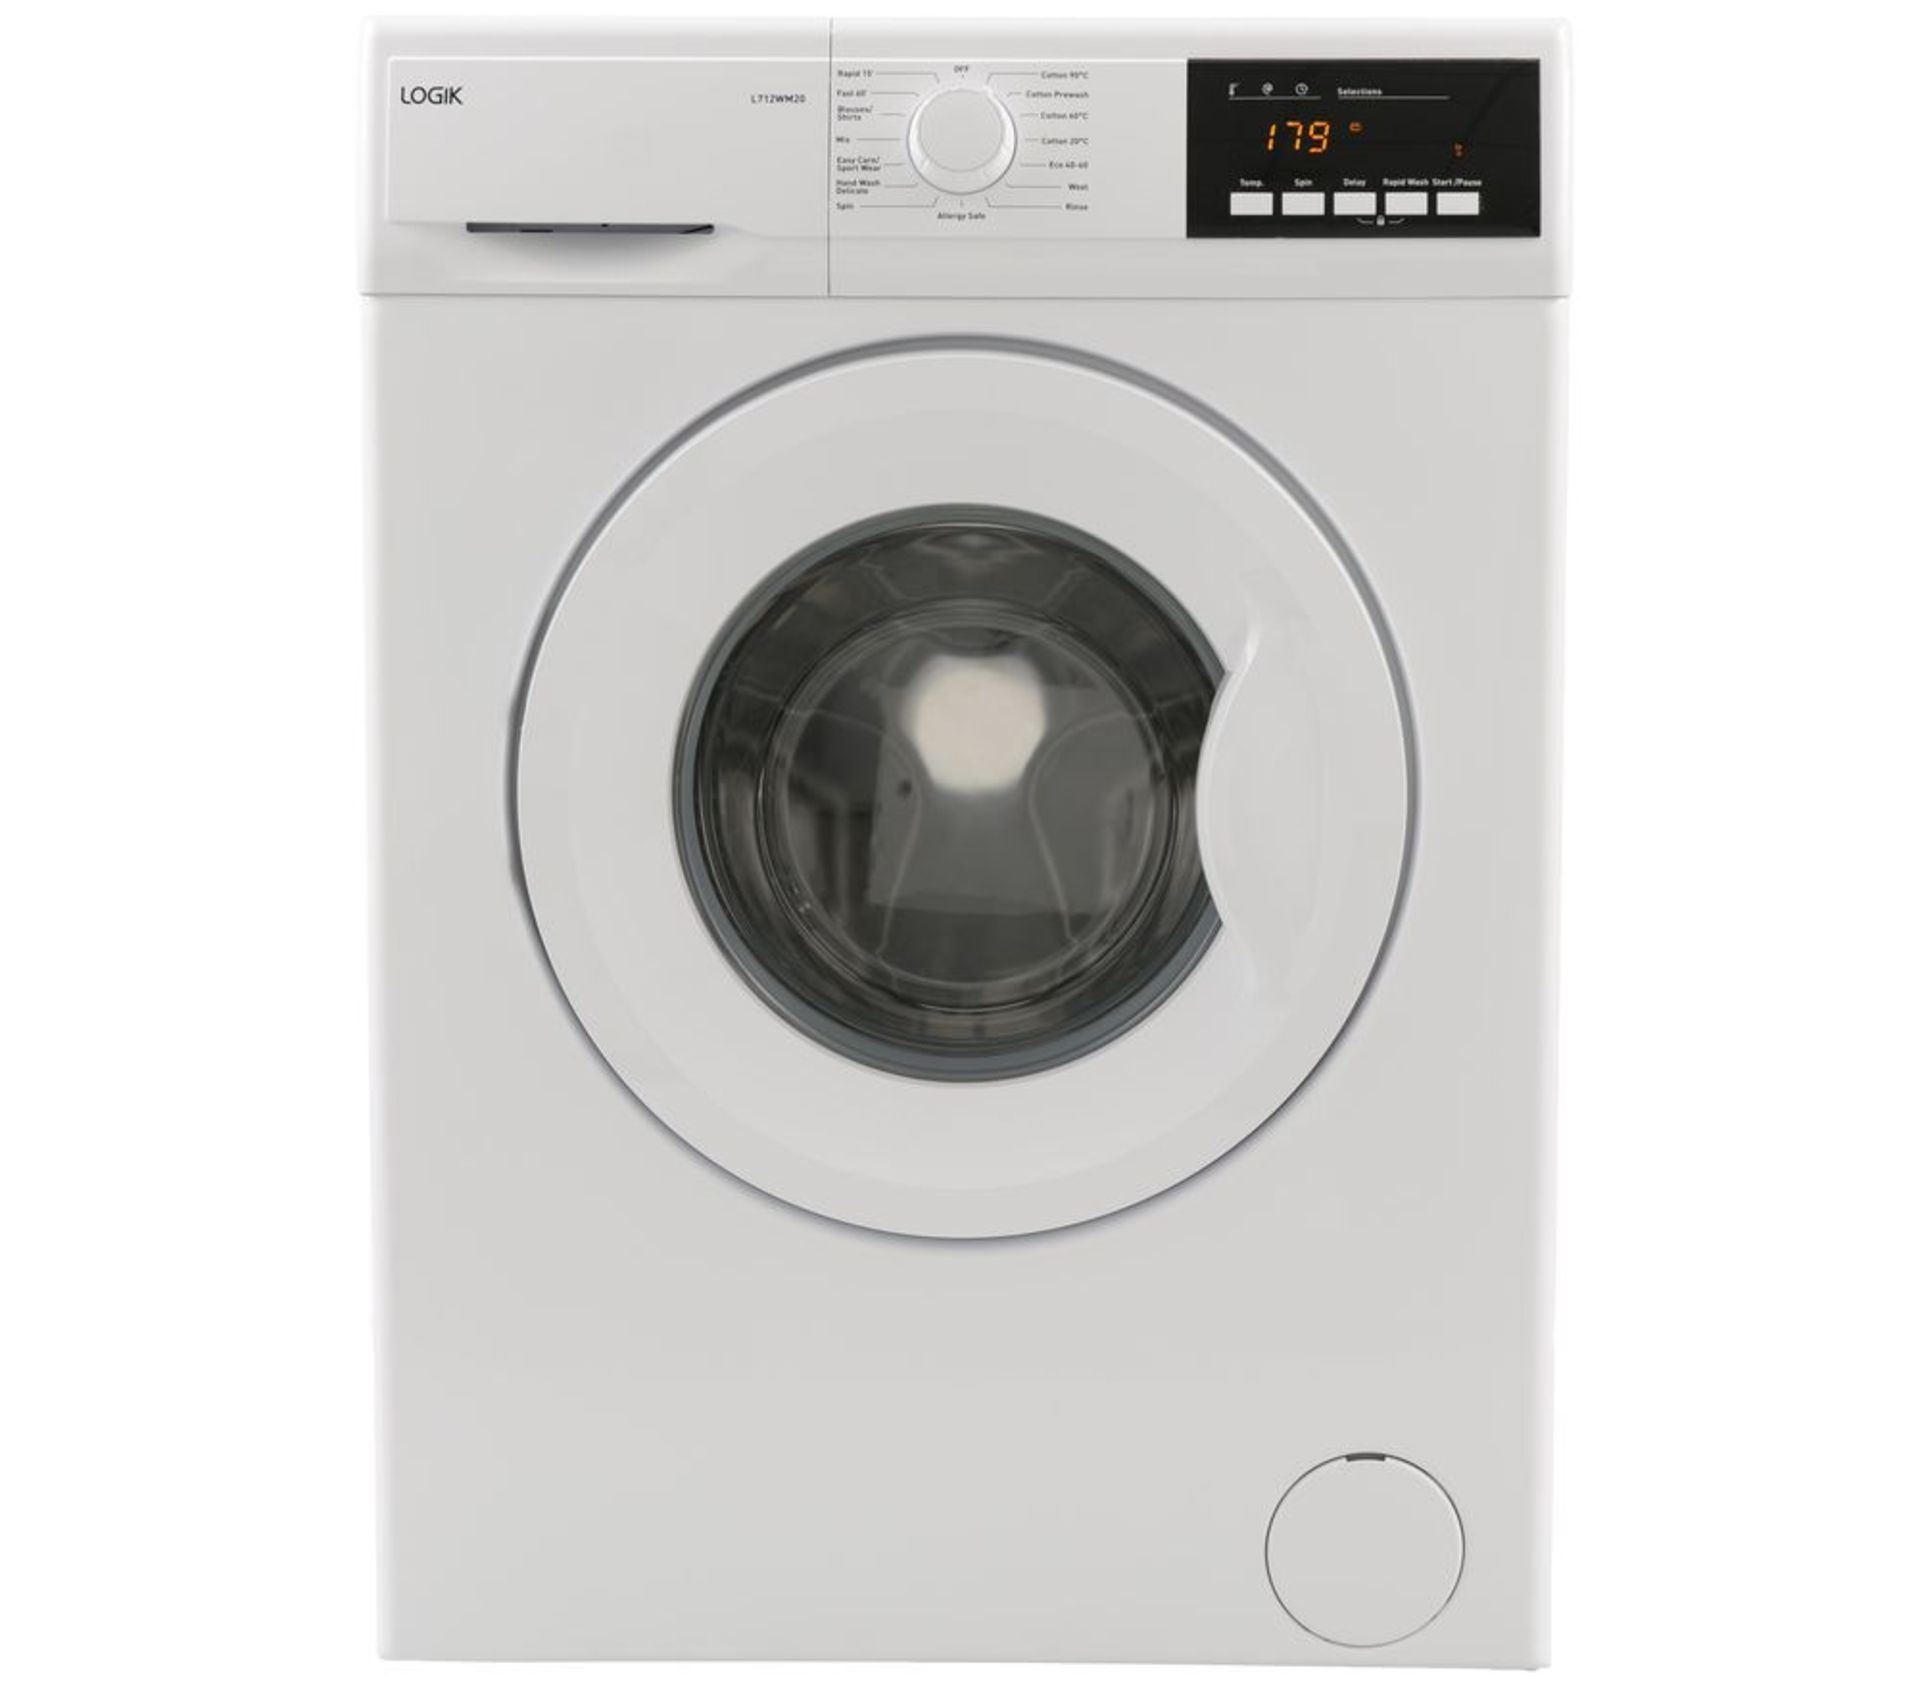 Pallet of Mixed Logik Laundry White Goods. Latest selling price £1129.94*